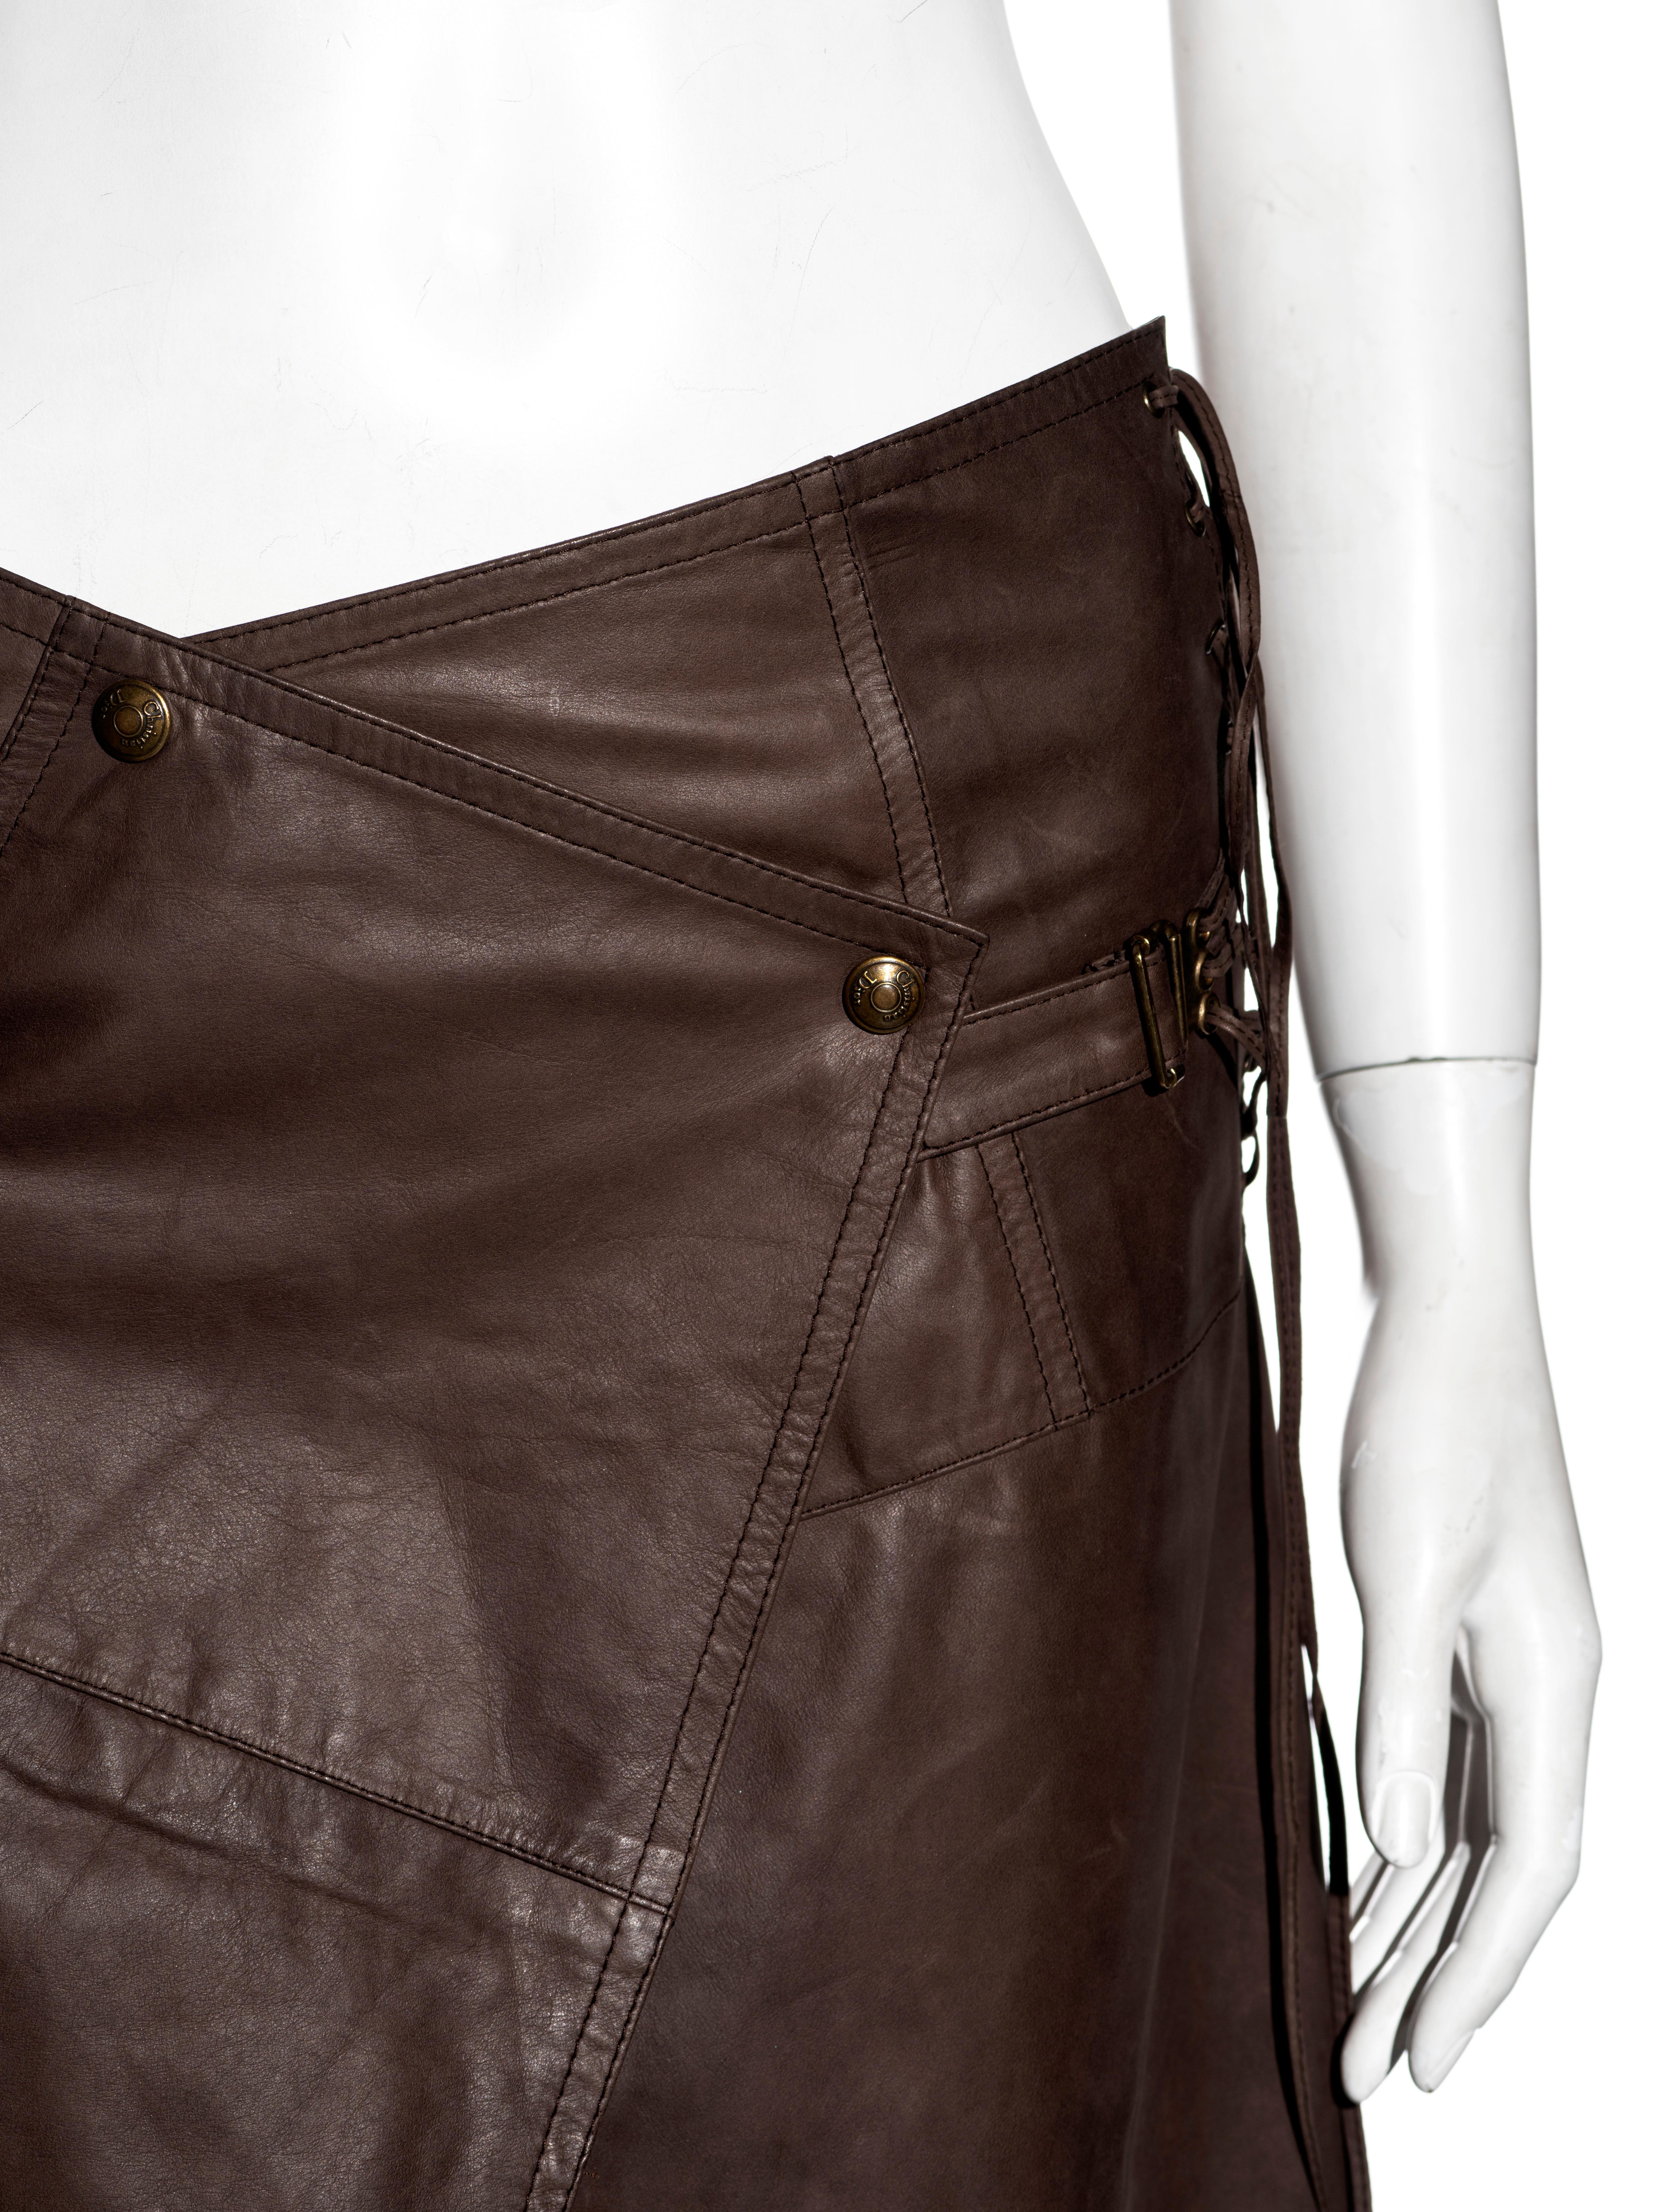 Christian Dior by John Galliano brown leather wrap skirt, ss 2001 In Excellent Condition In London, GB